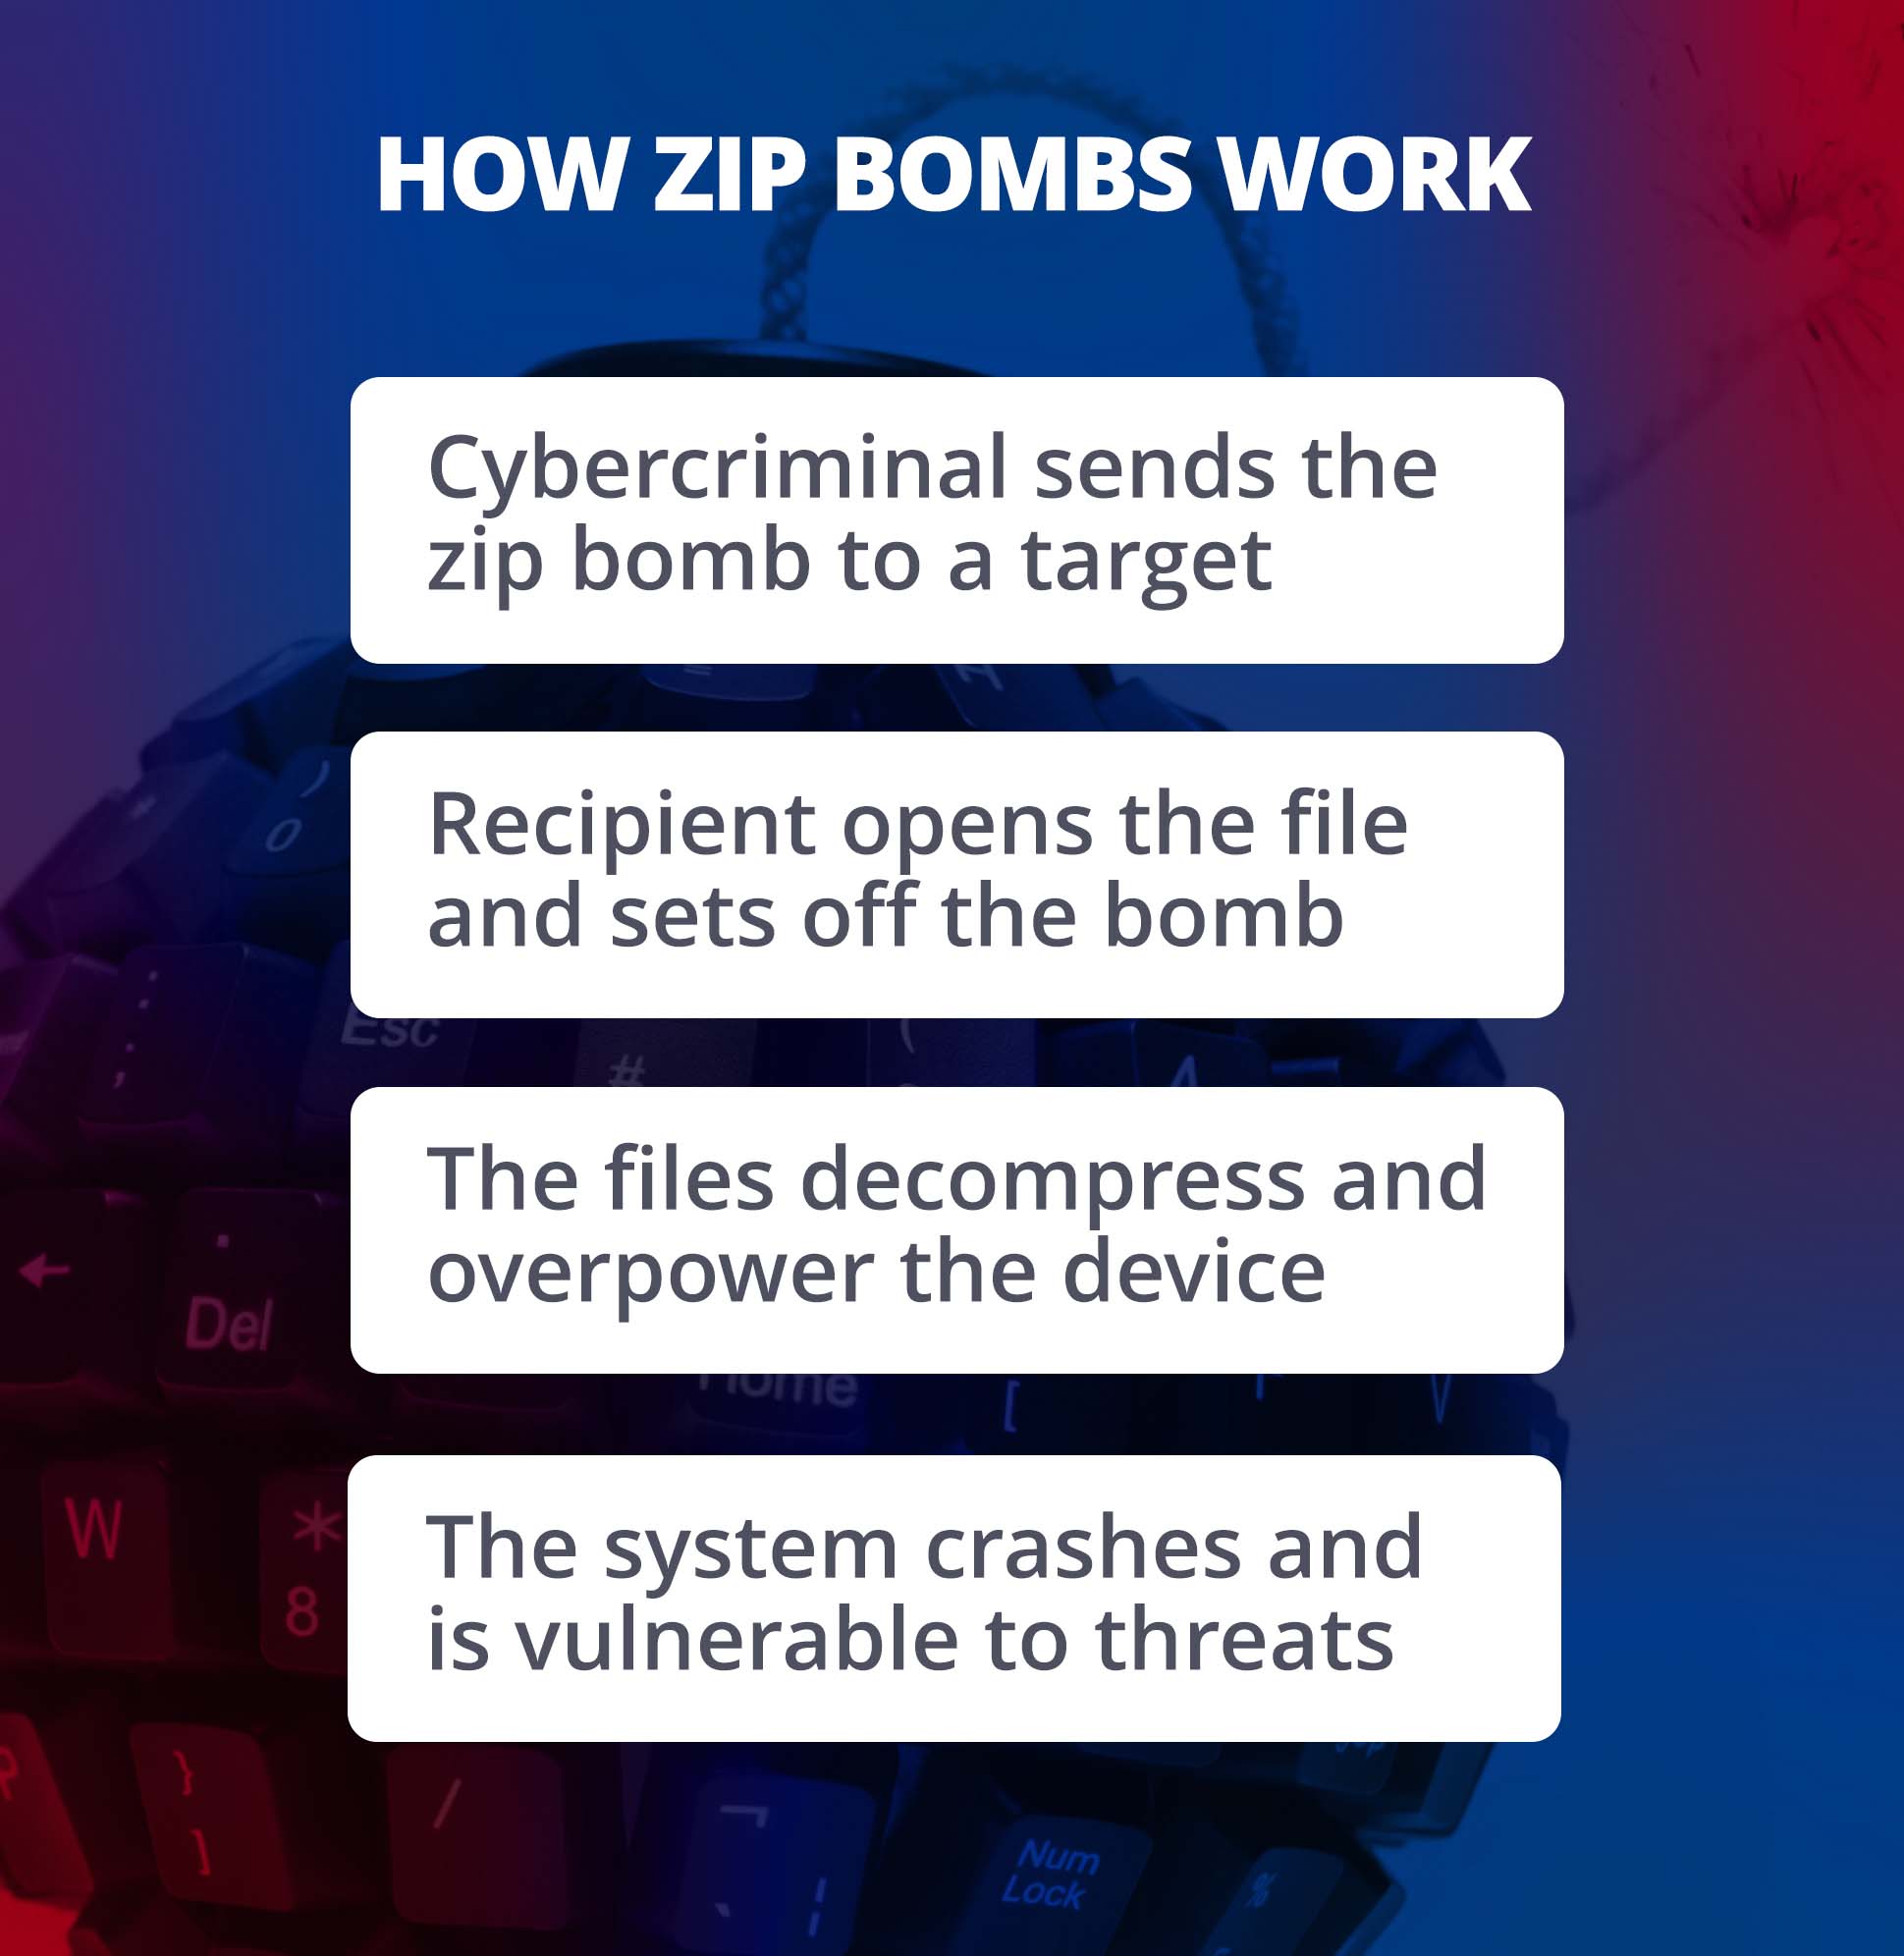 Infographic explaining how a zip bomb works step by step - from a cybercriminal sending the zip bomb to a target to their system crashing and leaving it vulnerable to threats.